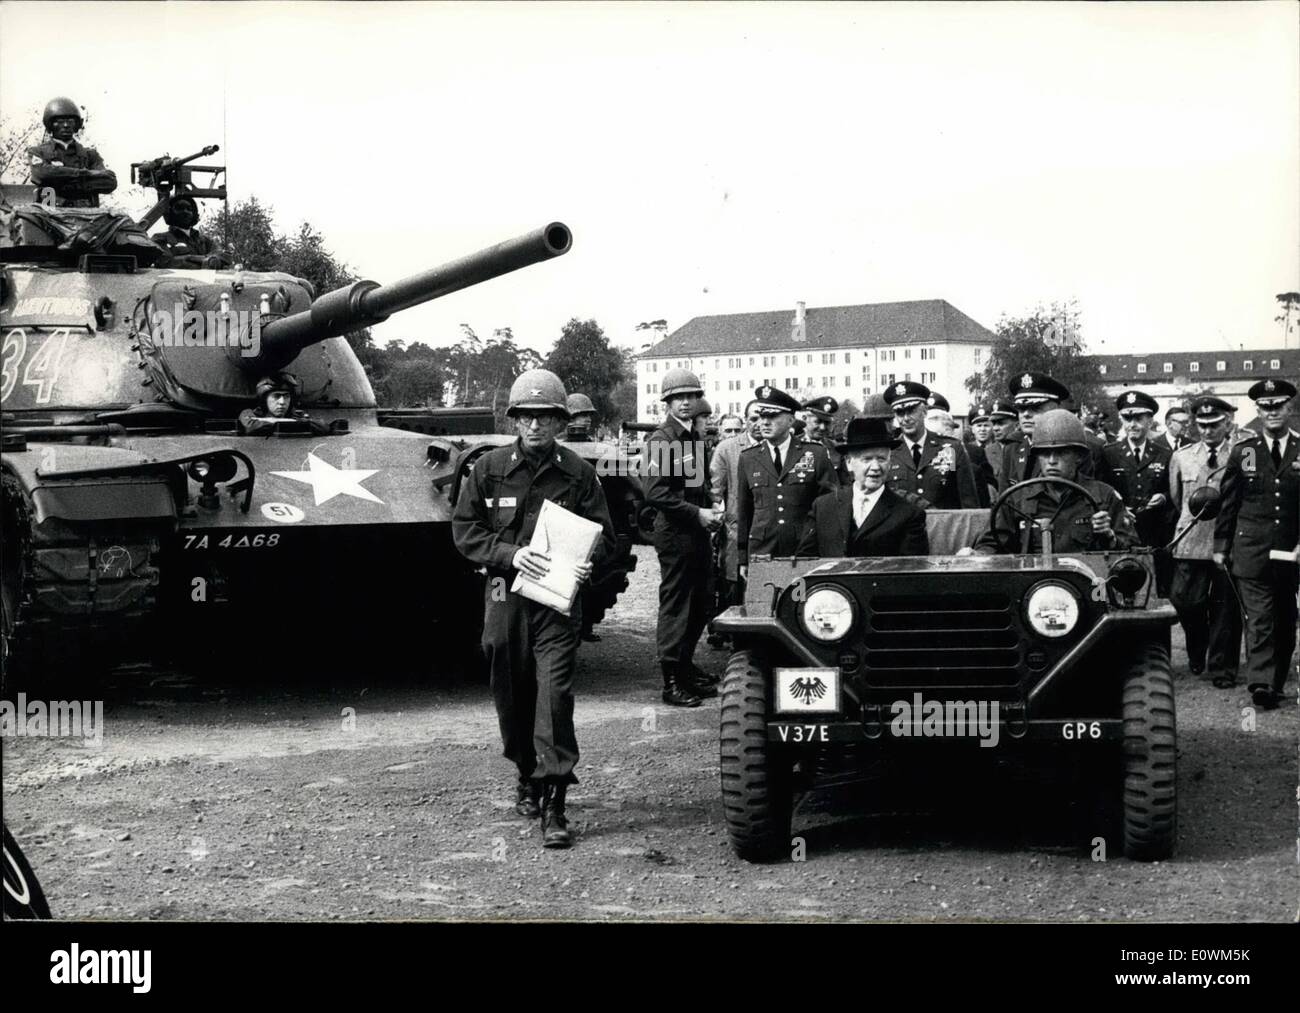 May 05, 1963 - German President sees display of US arms German Federal President Dr. Heinrich Luebke (with black Homburg hat) was guest of the US-Army's V. Corps During a display of new equipment and arms at Campo Pond near Hanau, Germany. President Luebke was accompanied by Usareur Commander in Chief, General Freeman, and the Commander of V. Corps, General Michaelis. On the M-60-tank, the 105-mm-recoilless rifle mounted on a jeep and several combat missiles. Stock Photo